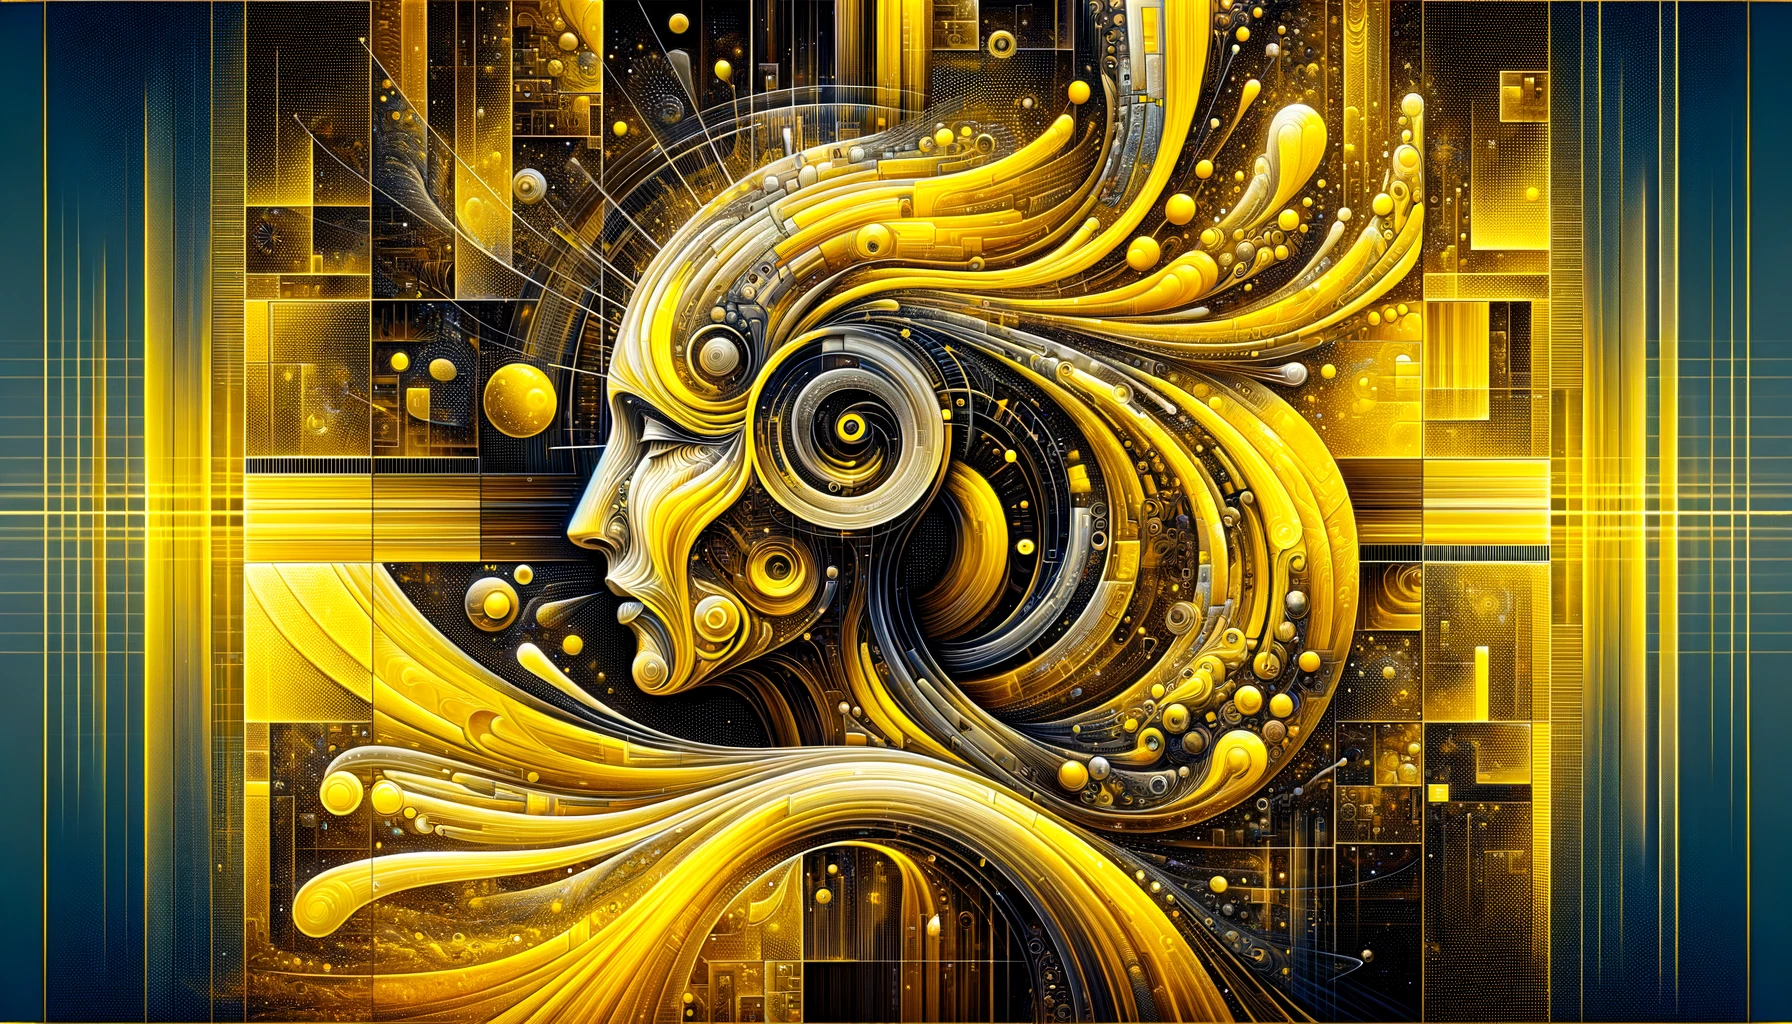 DALL-E-2024-01-19-23.07.43---A-hyper-stylized-artistic-representation-with-a-dominant-yellow-color-theme--blending-abstract-art-and-futuristic-concepts.-The-image-is-filled-with-e